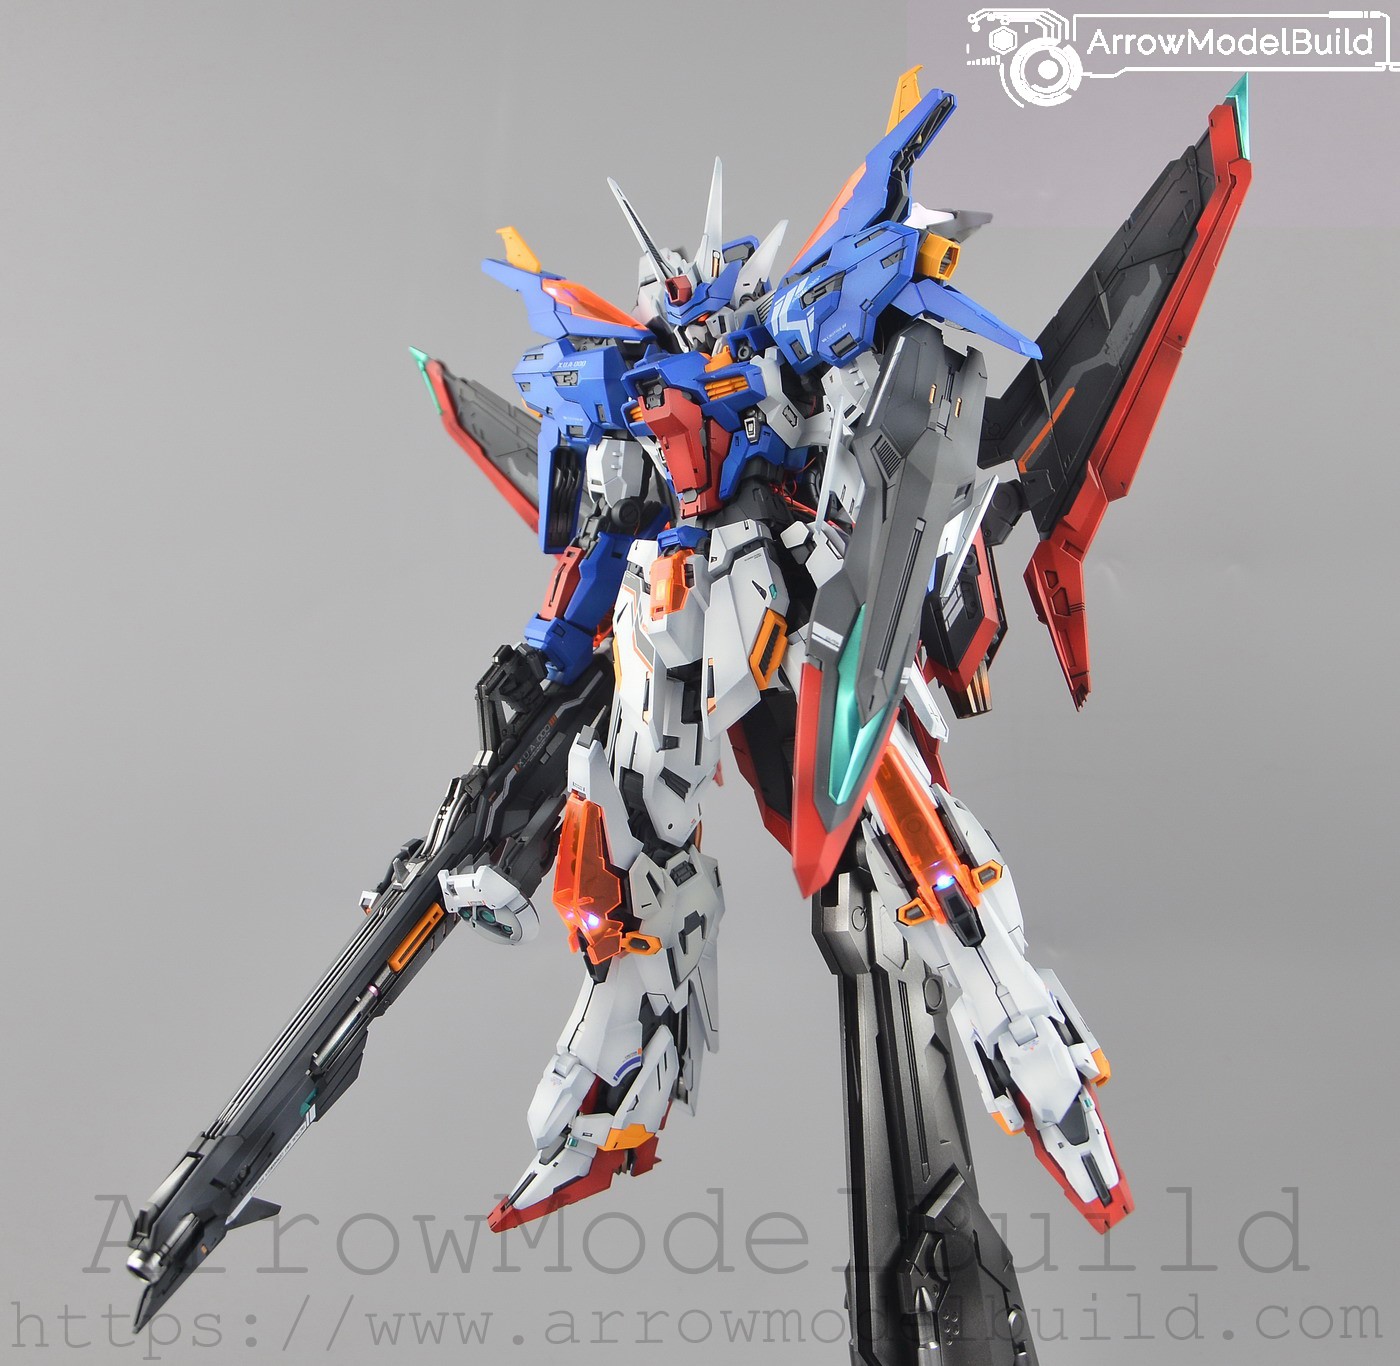 Picture of ArrowModelBuild Genesis Gundam (Z Gundam Color 2.0) with LED and Pilot Built & Painted MG 1/100 Model Kit